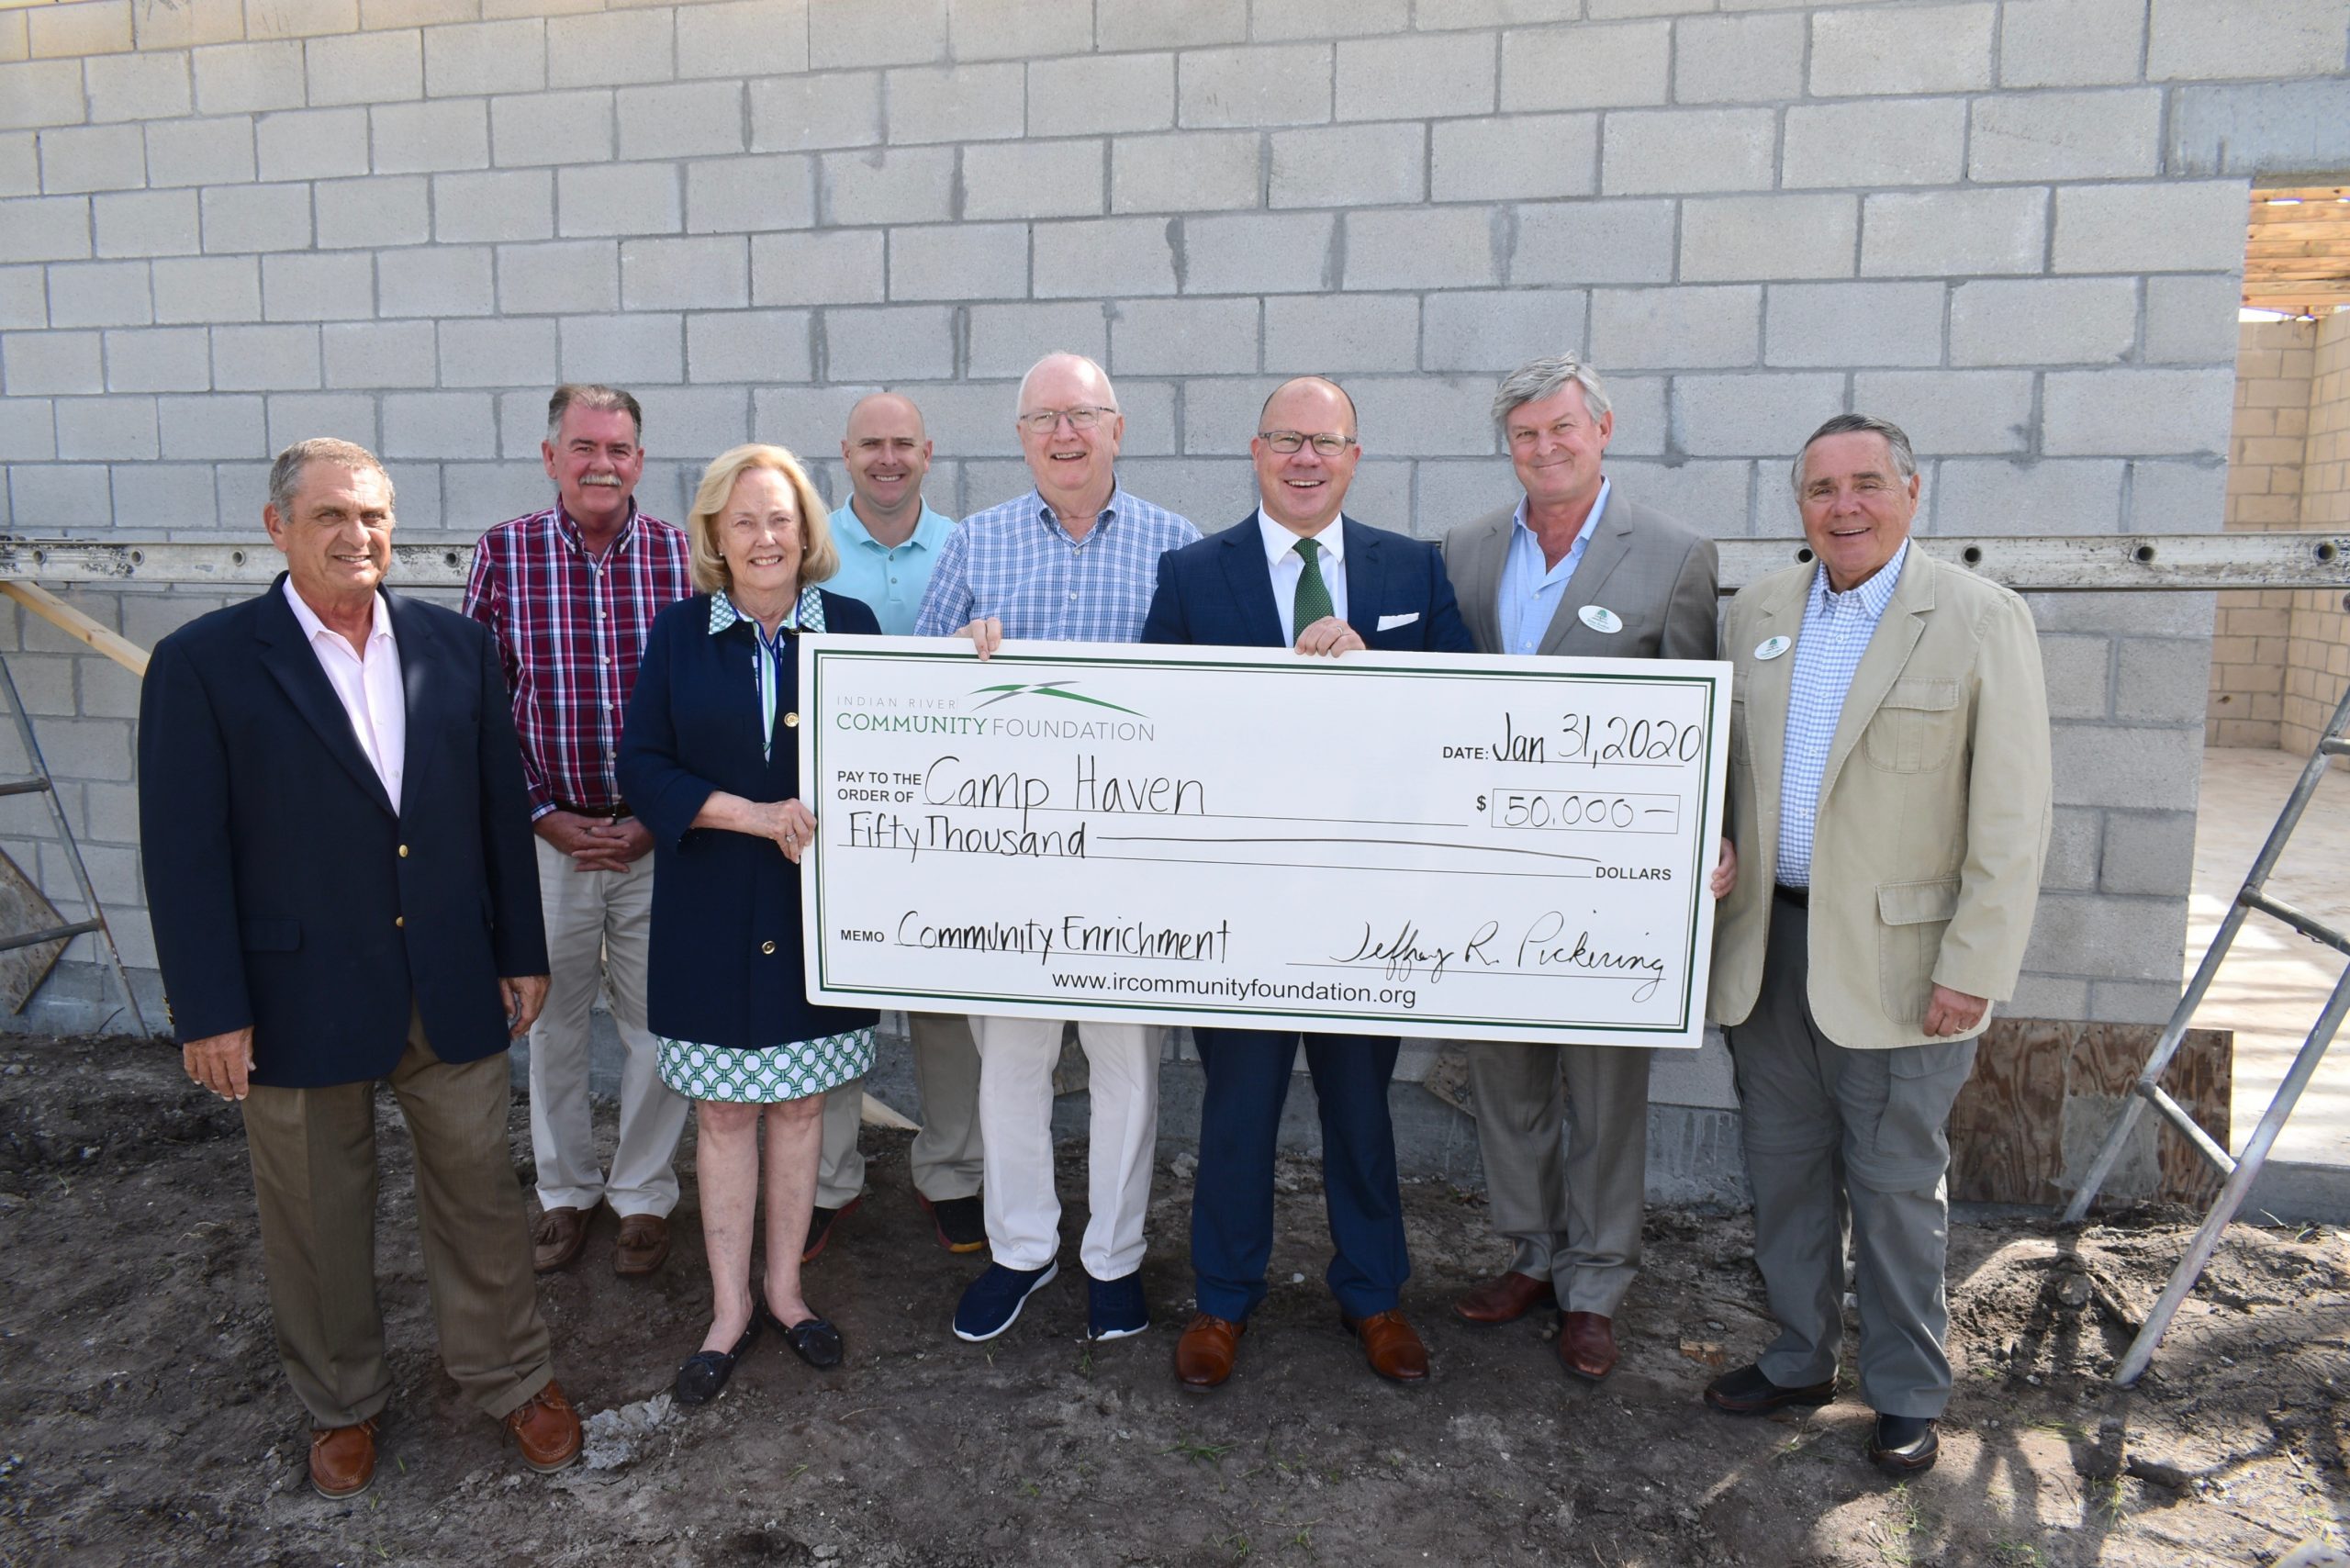 Community Foundation Awards $50,000 to Camp Haven